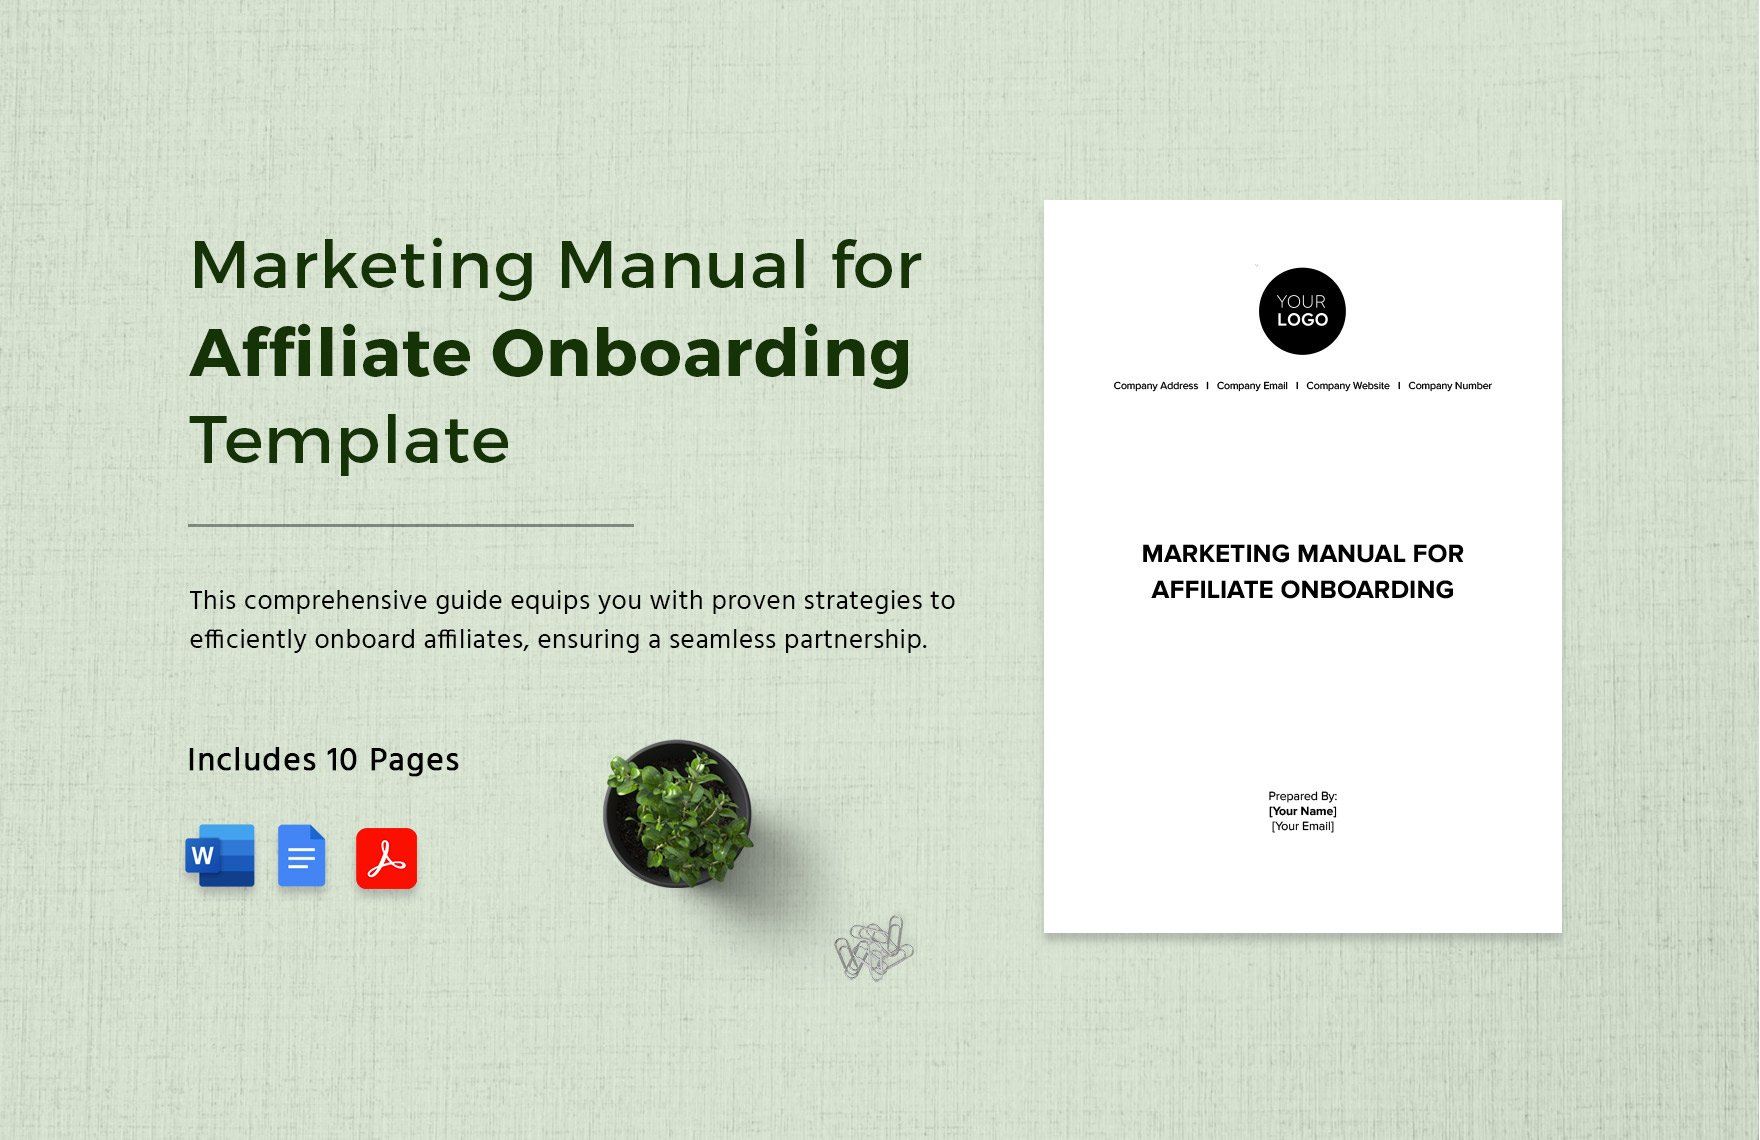 Marketing Manual for Affiliate Onboarding Template